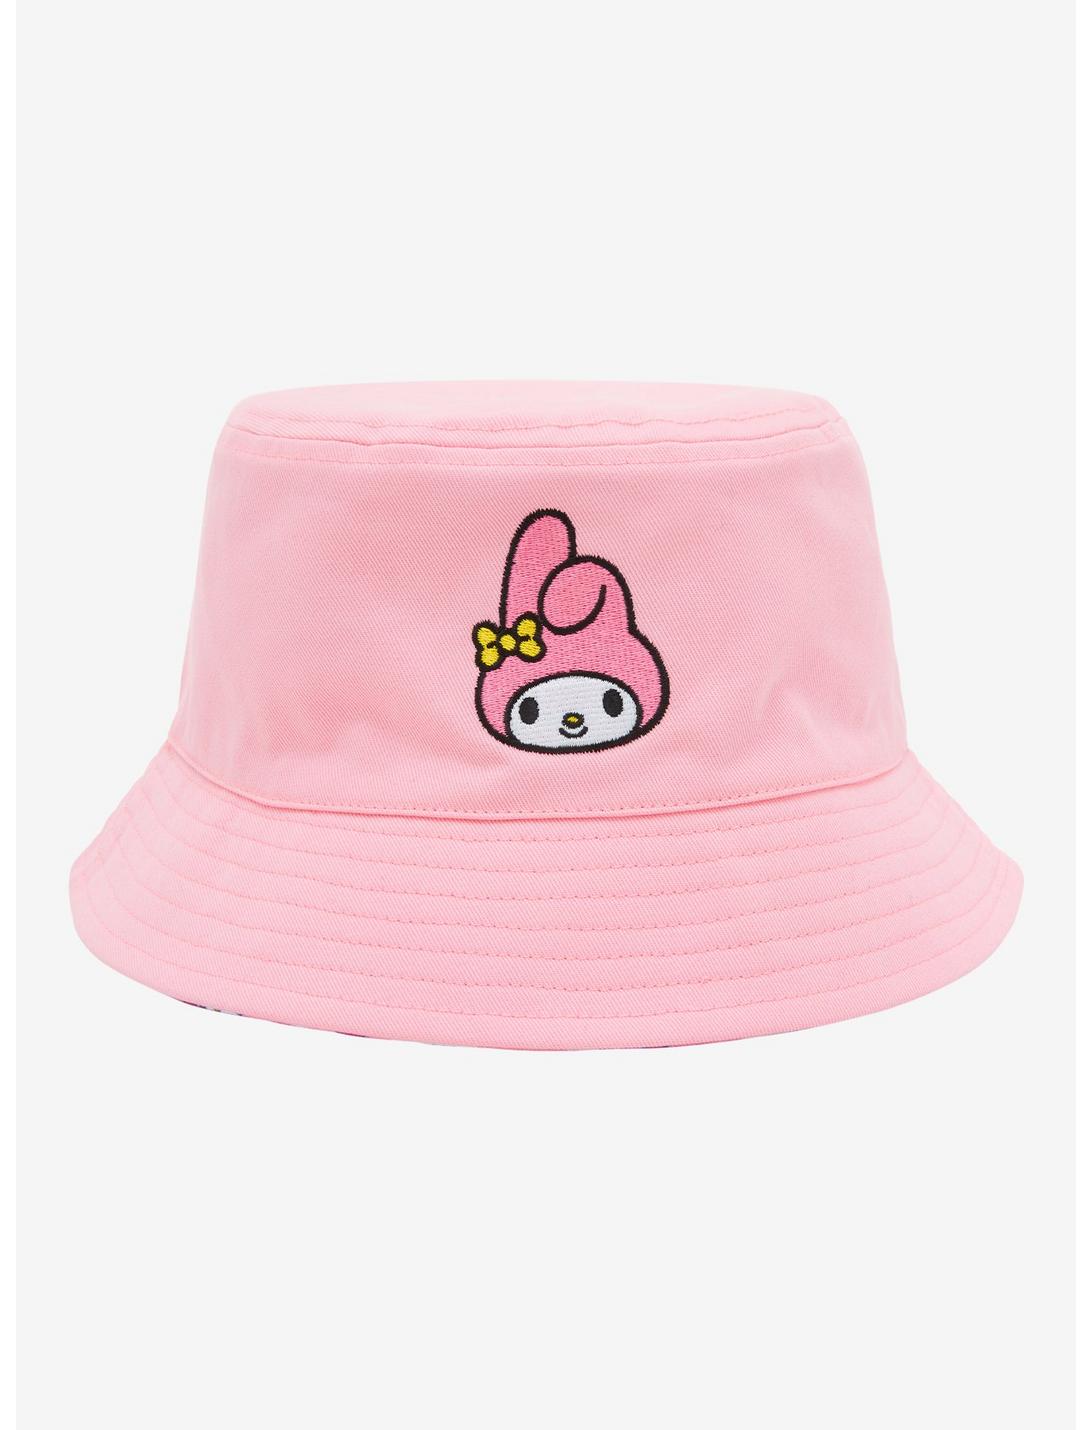 Sanrio My Melody Gingham Allover Print Reversible Bucket Hat - BoxLunch Exclusive, , hi-res